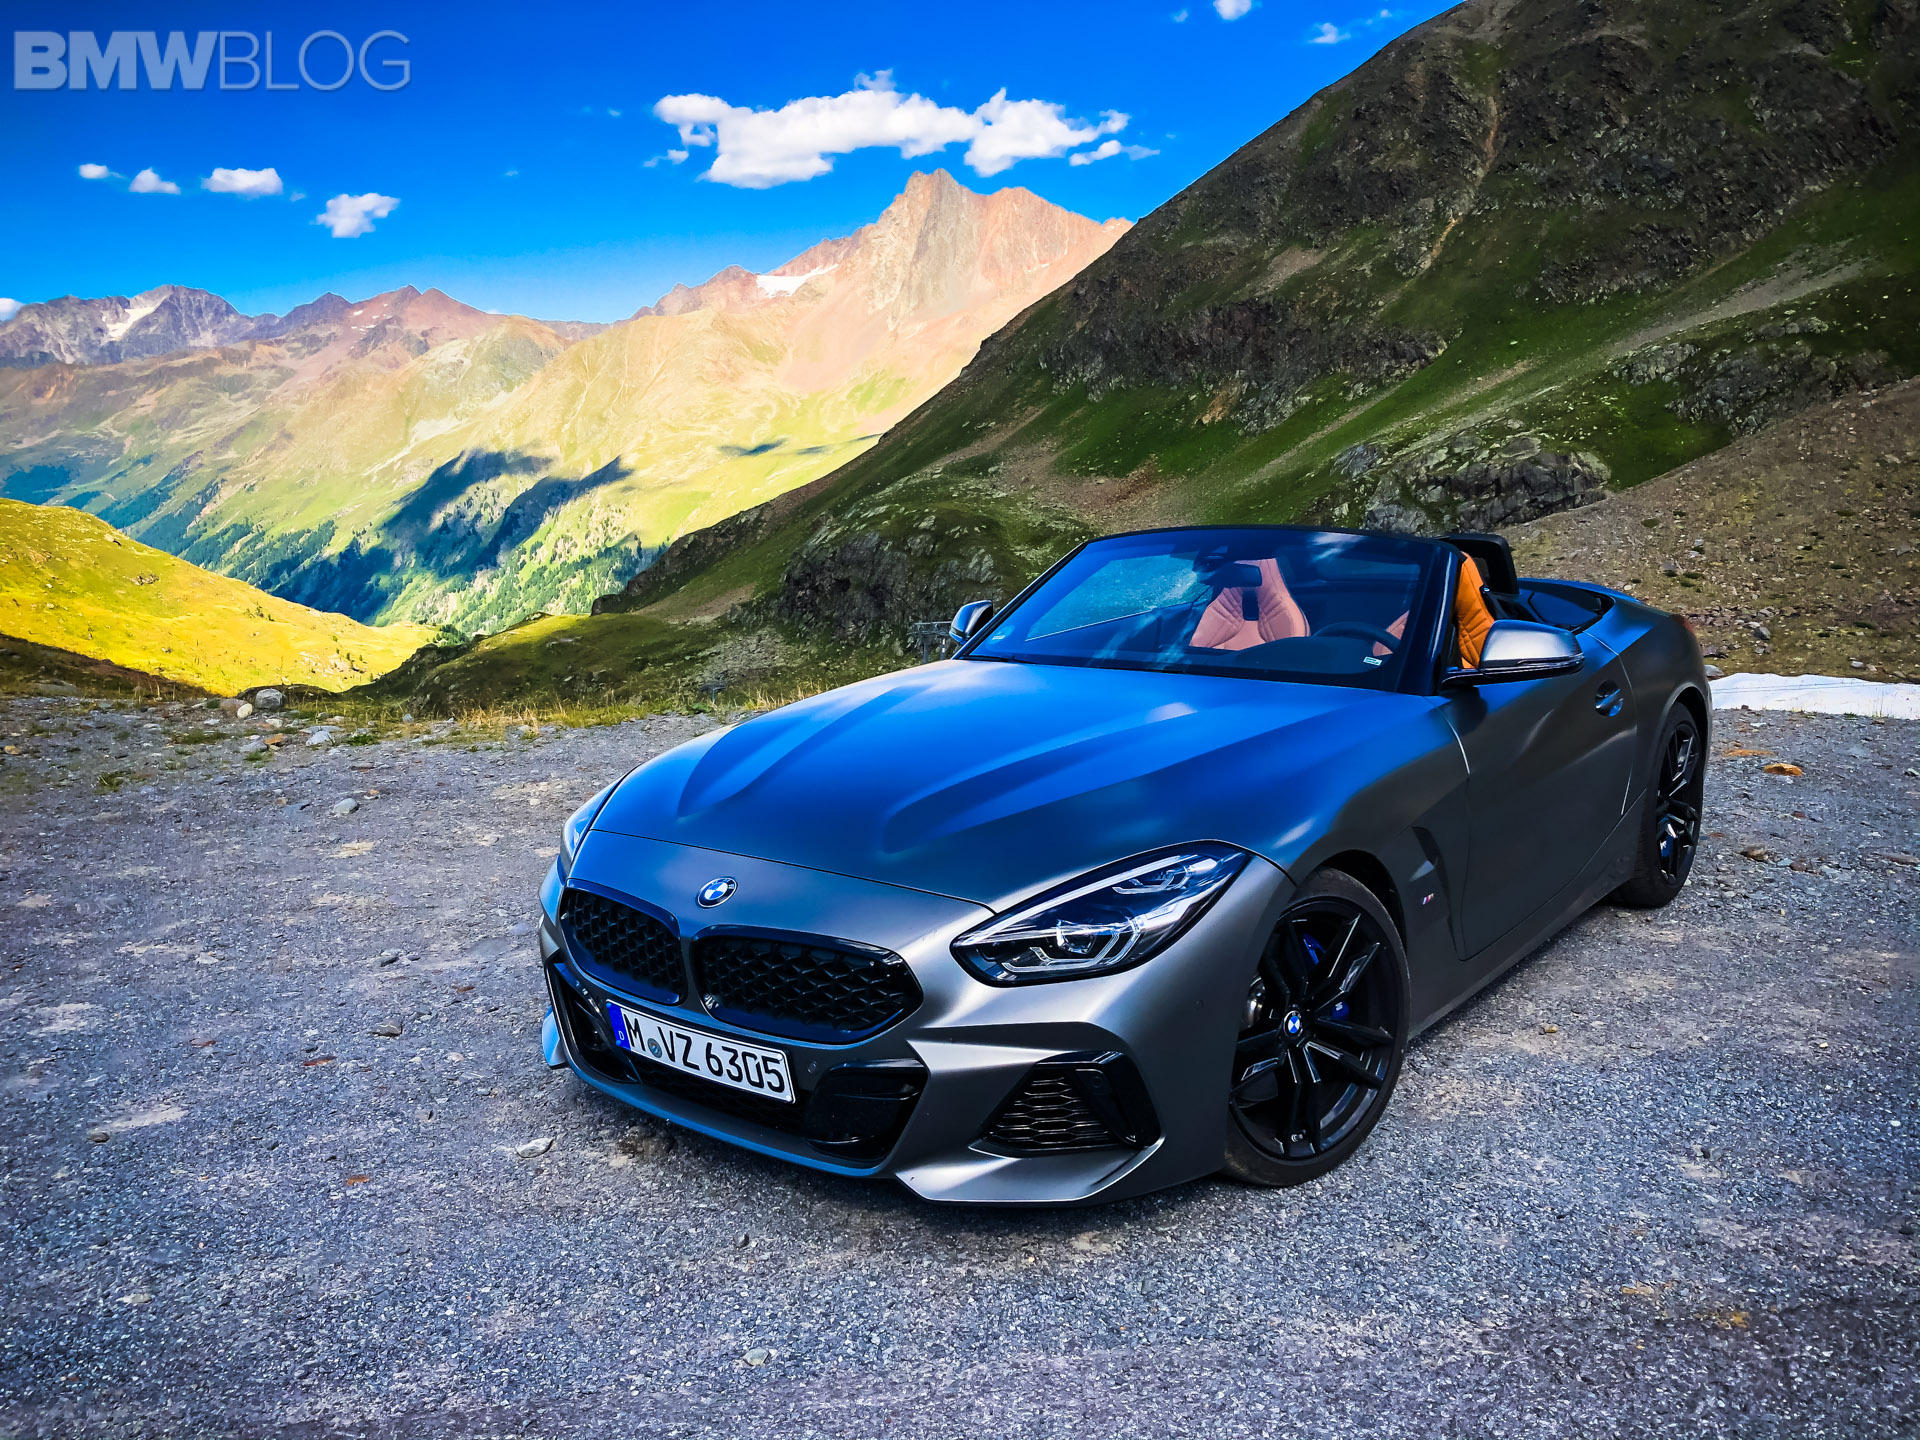 ROAD TRIP: 2020 BMW Z4 M40i – A Tribute to Sheer Driving Pleasure